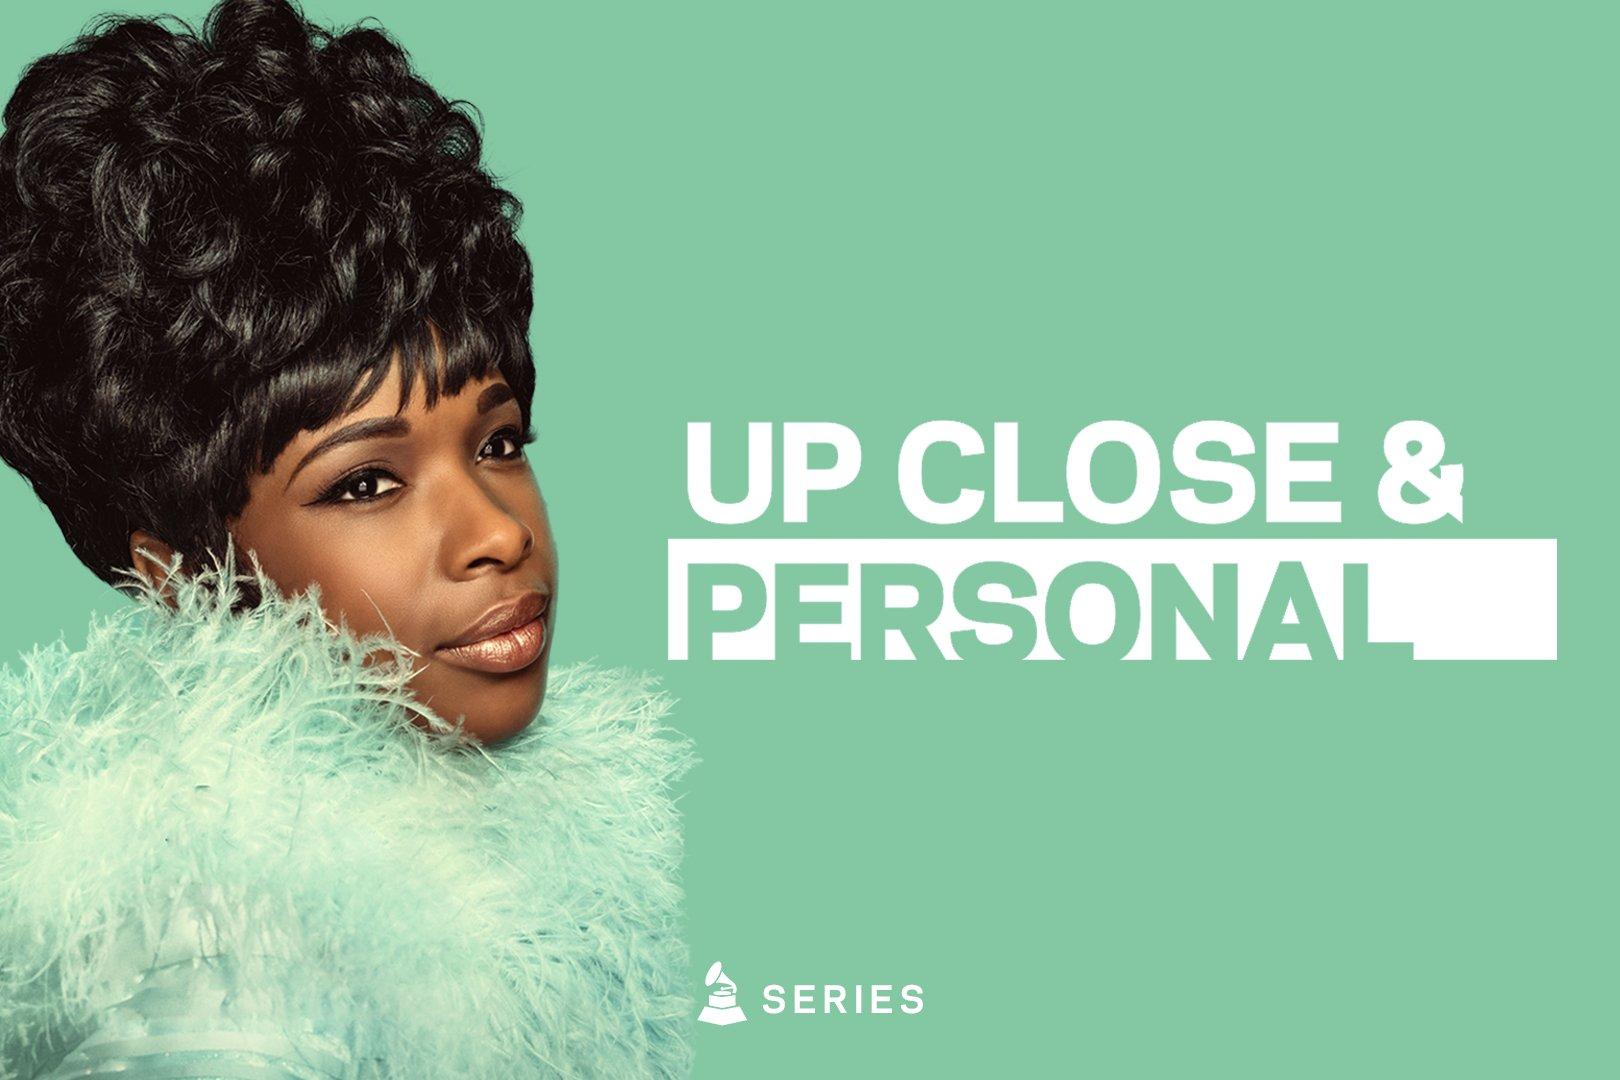 Artwork for Up Close & Personal Collection